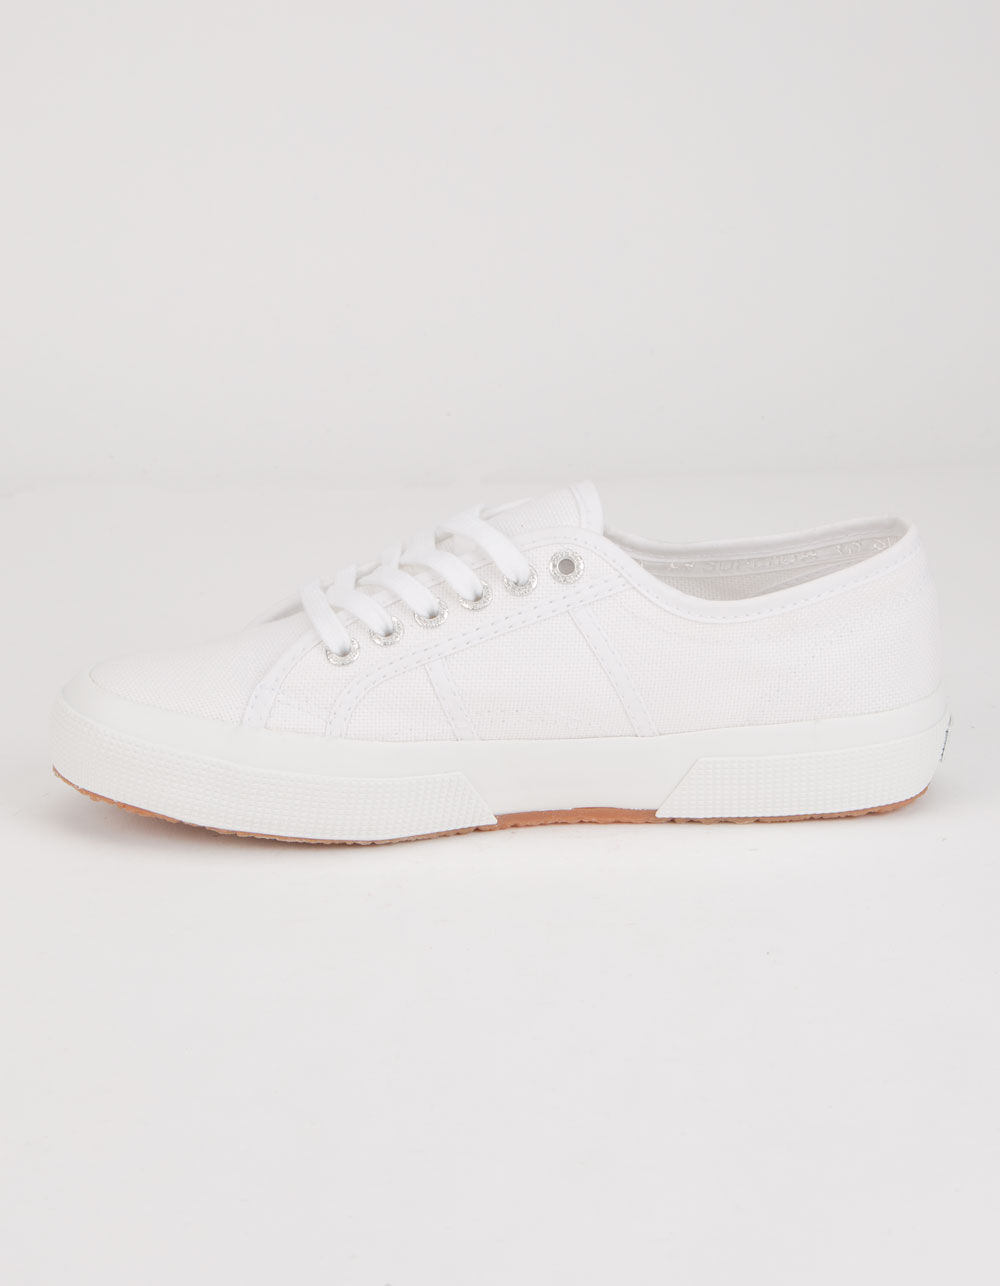 SUPERGA 2750 Cotu Classic White Womens Shoes - WHITE | Tillys